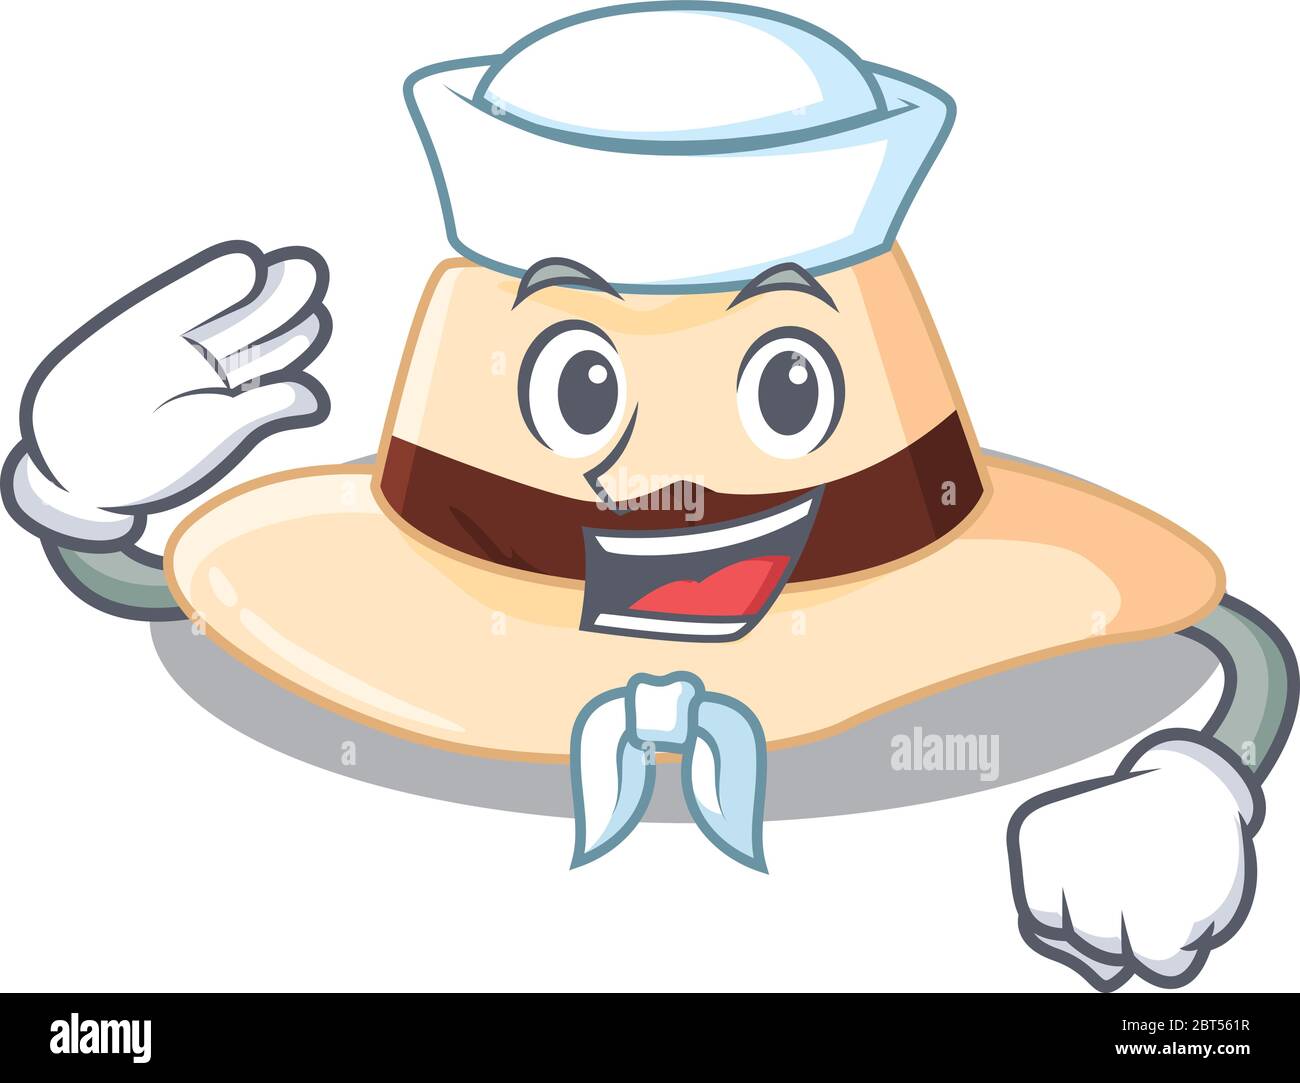 Smiley sailor cartoon character of panama hat wearing white hat and tie Stock Vector